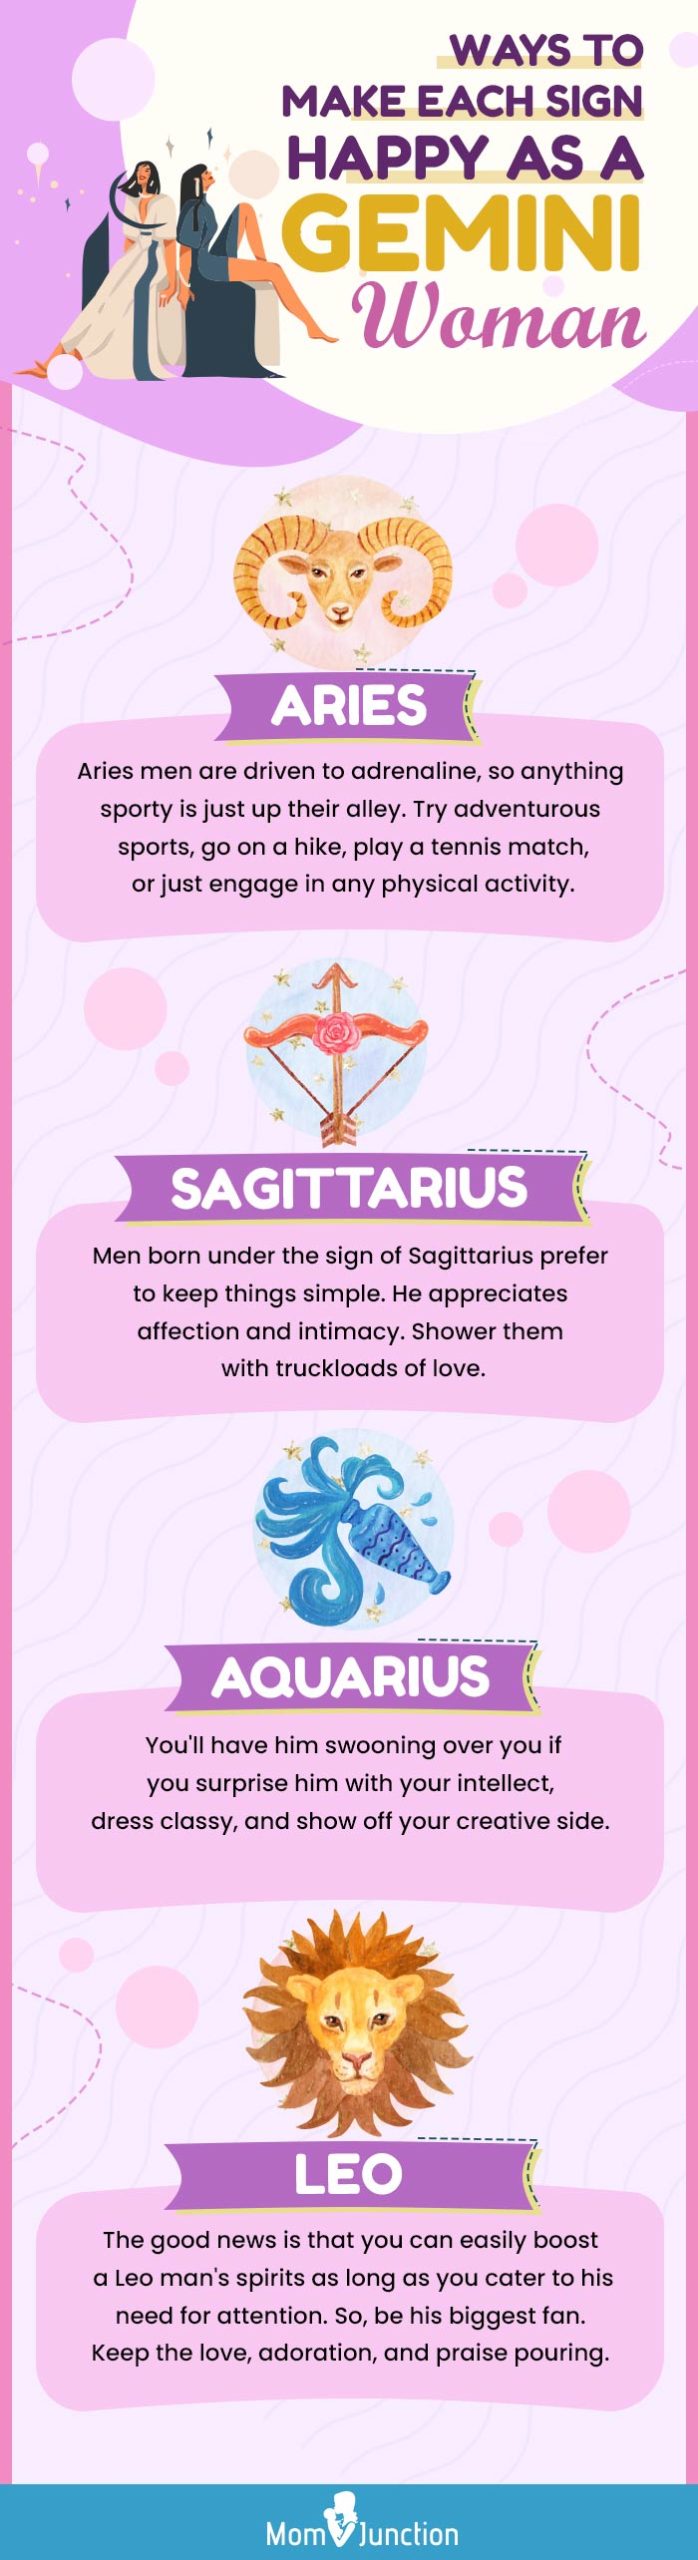 ways to make each sign happy as a gemini woman [infographic]